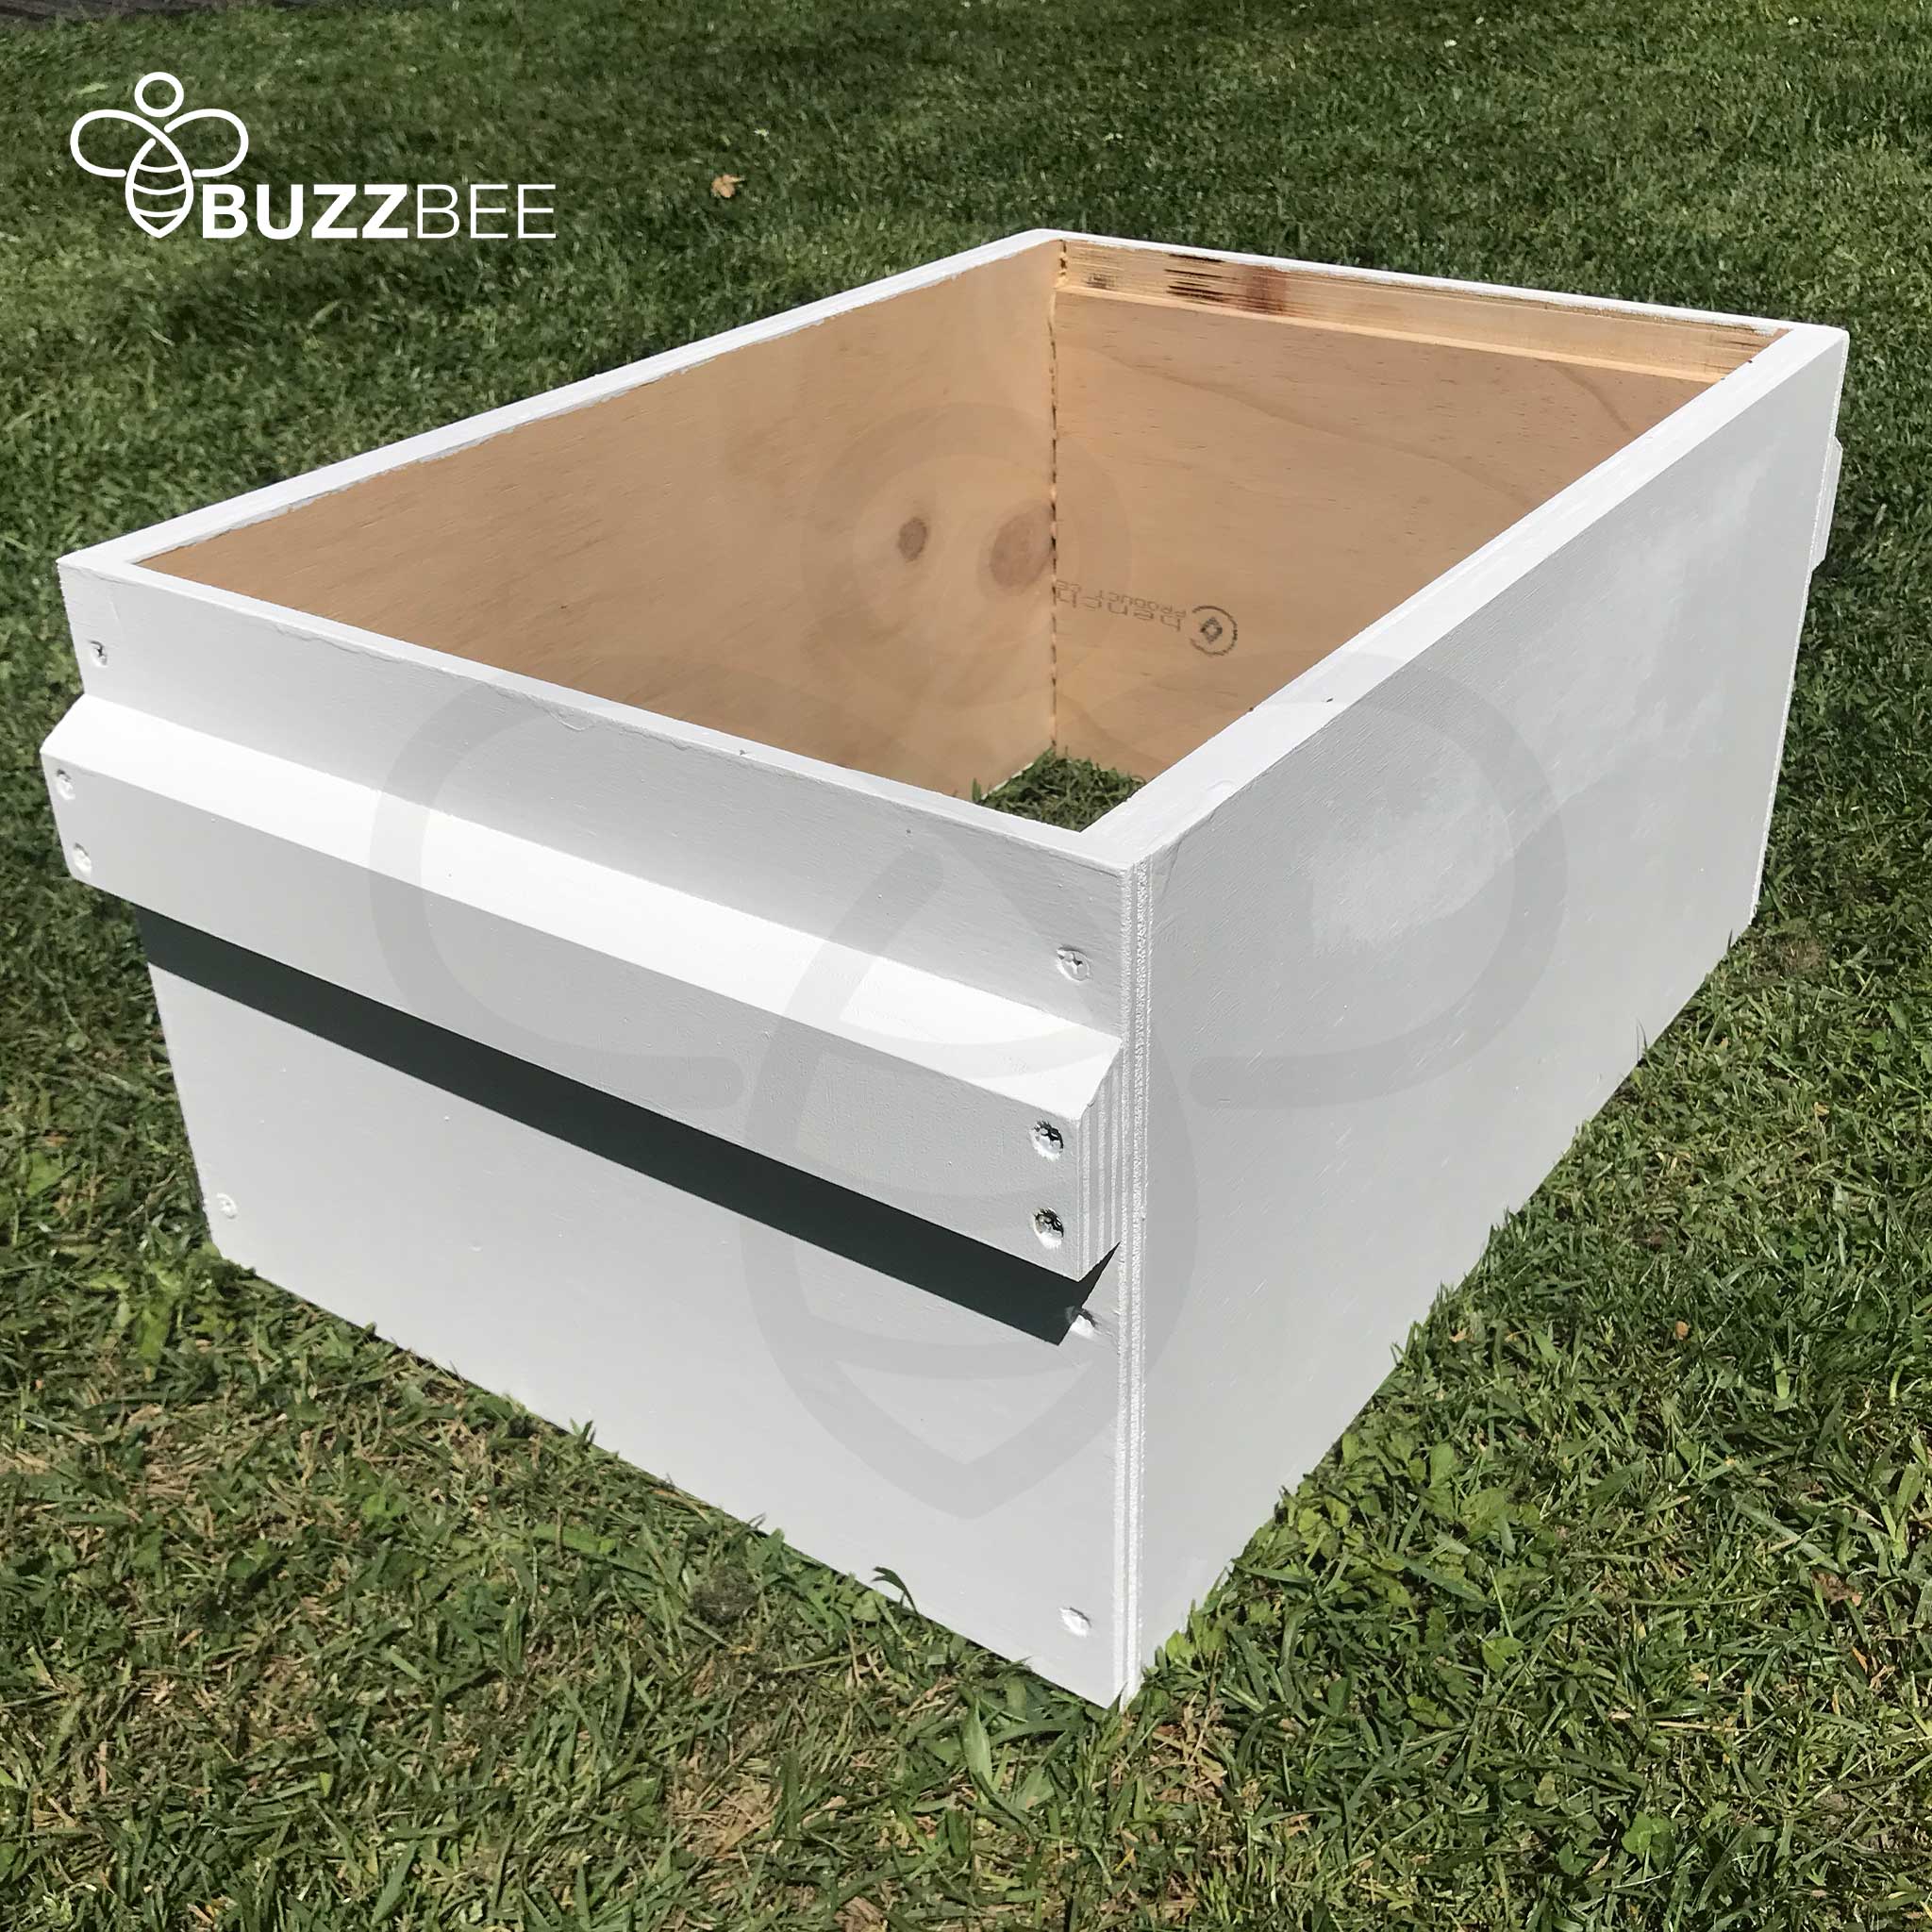 Premium Buzzbee Deep Super for Flow, Langstroth and Australian Beehives - Hive Parts collection by Buzzbee Beekeeping Supplies